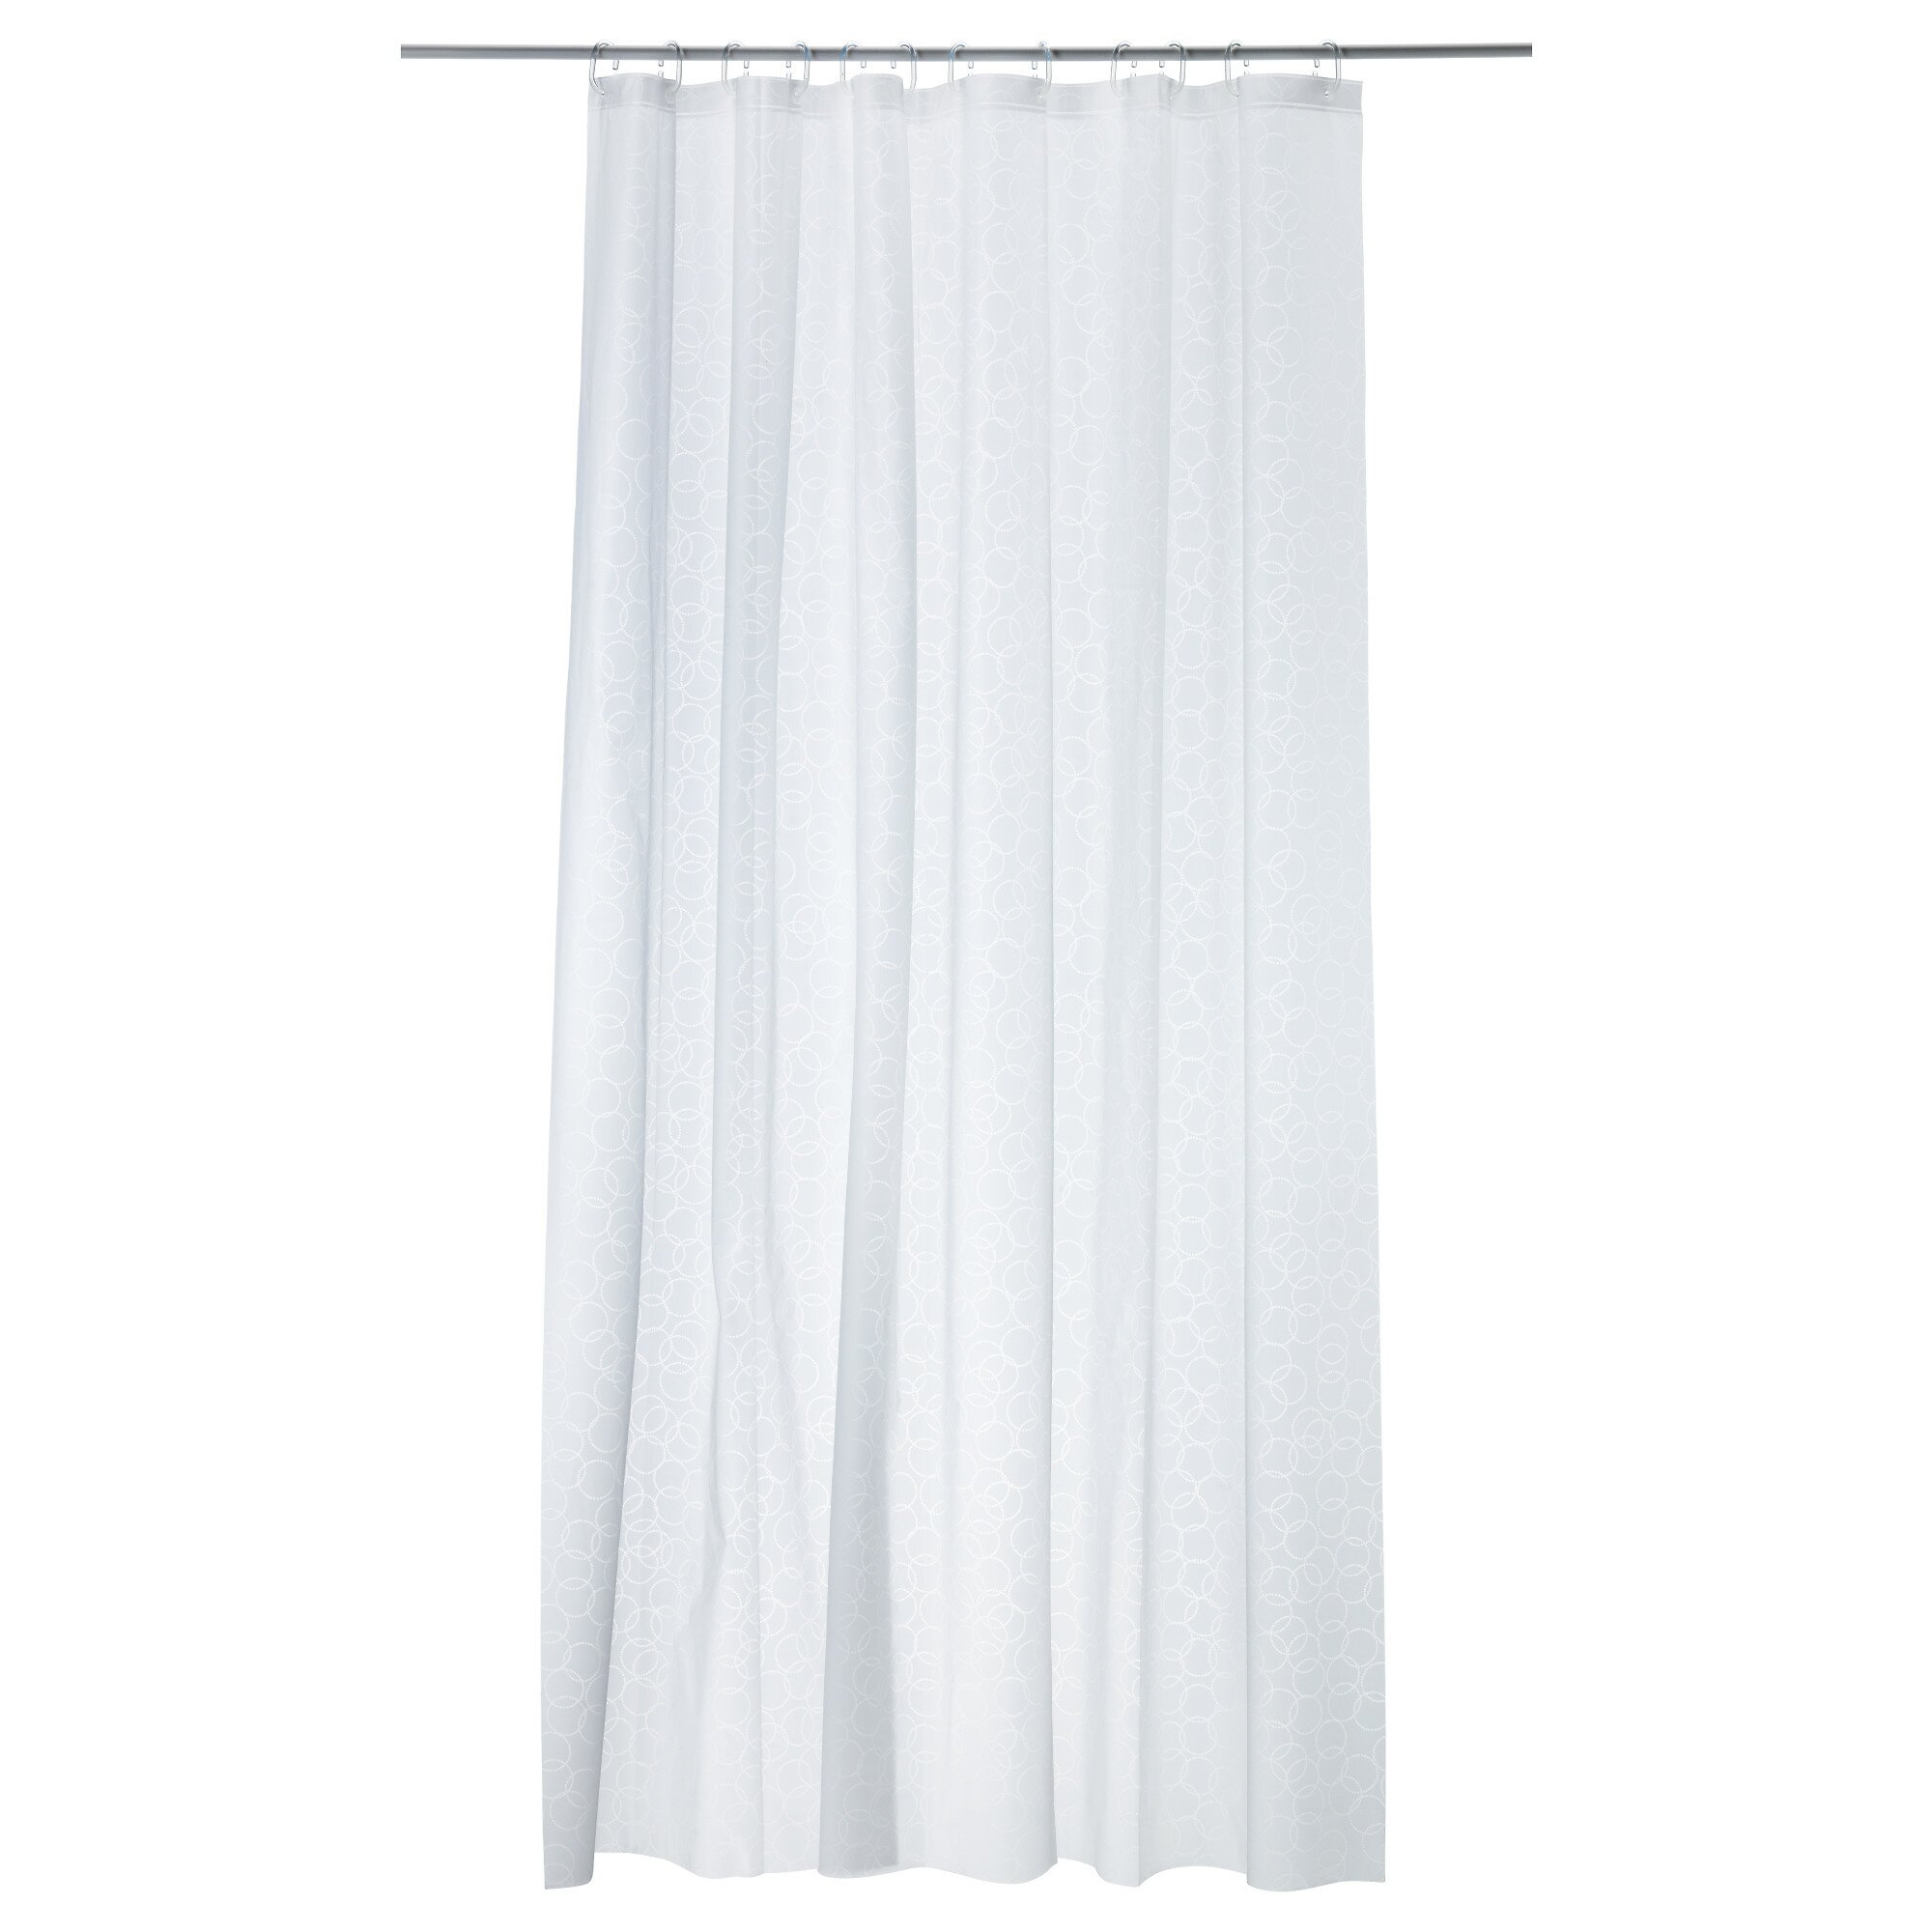 Ikea Shower Curtain for Best Your Bathroom Decoration: Extra Long Shower Curtain Target | Teal And White Shower Curtain | Ikea Shower Curtain